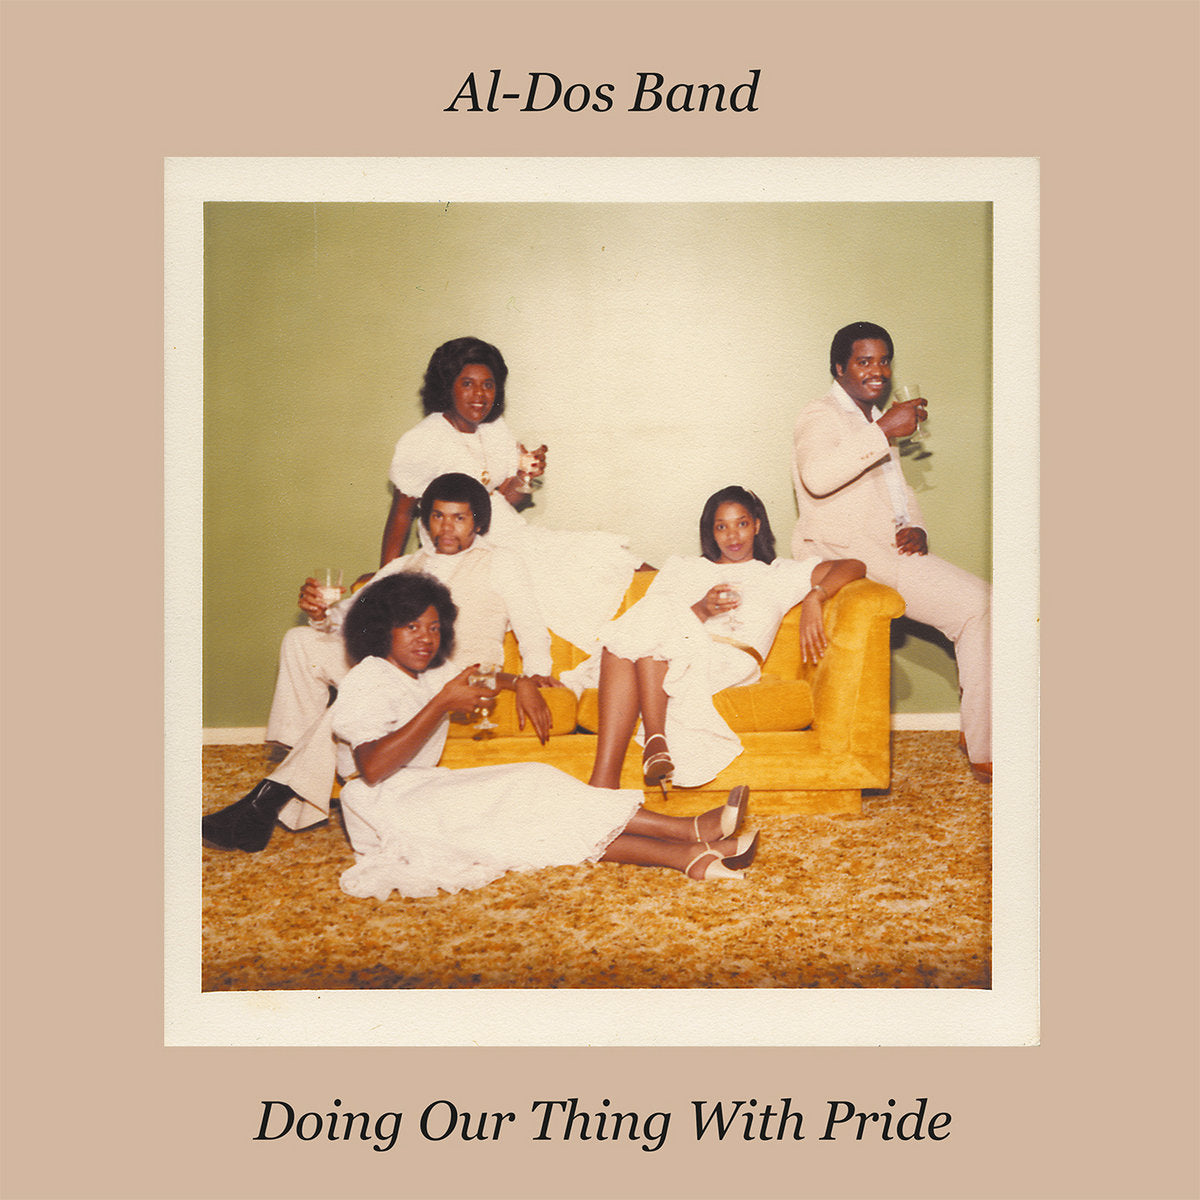 Al-Dos Band: Doing Our Thing With Pride (Vinyl LP)